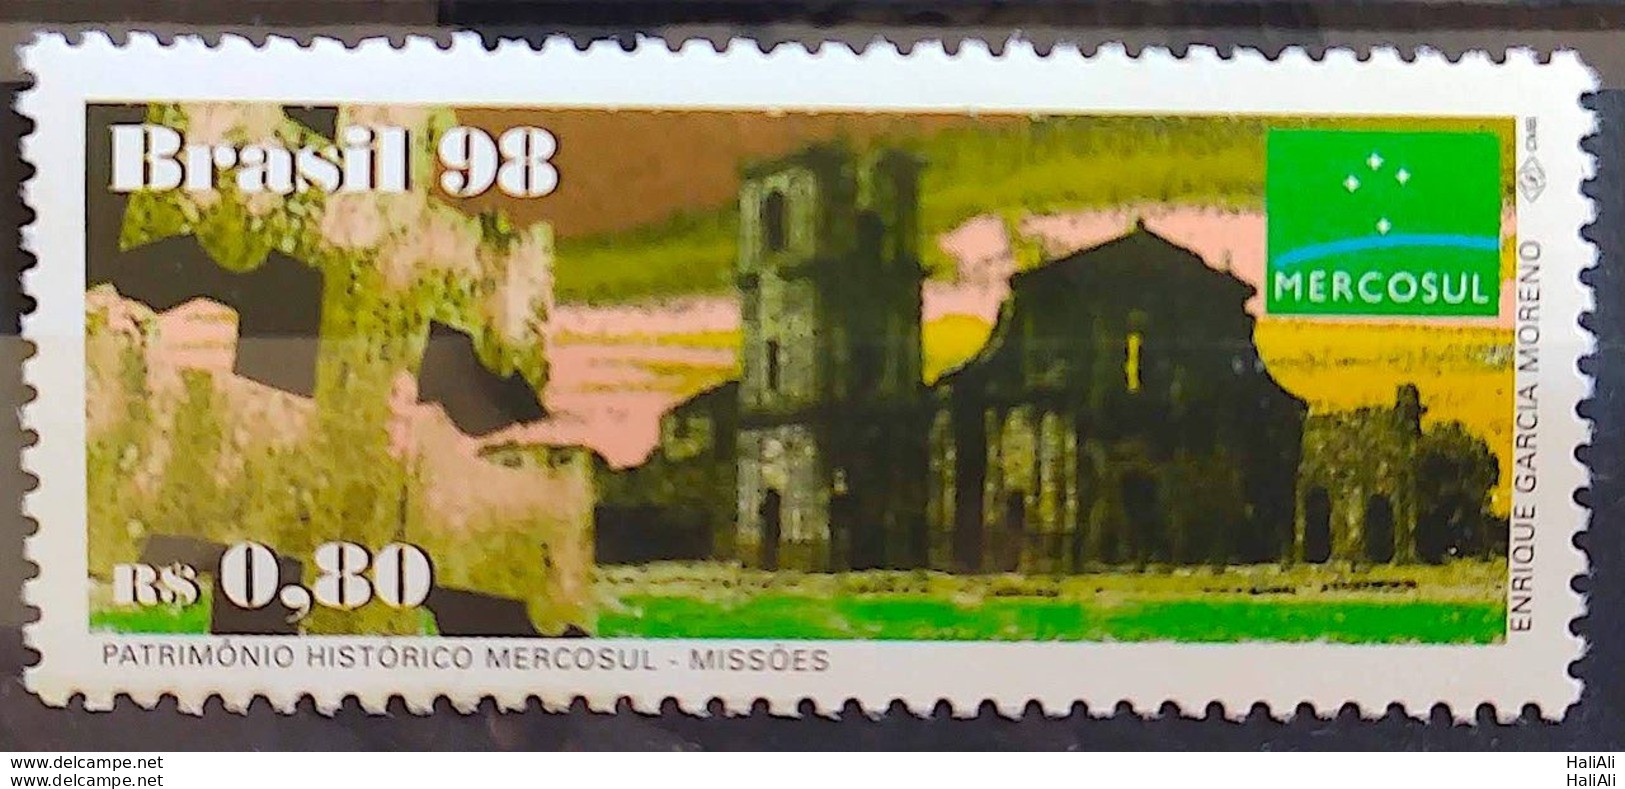 C 2158 Brazil Stamp Mercosur Historical Heritage Missions Church 1998 - Unused Stamps